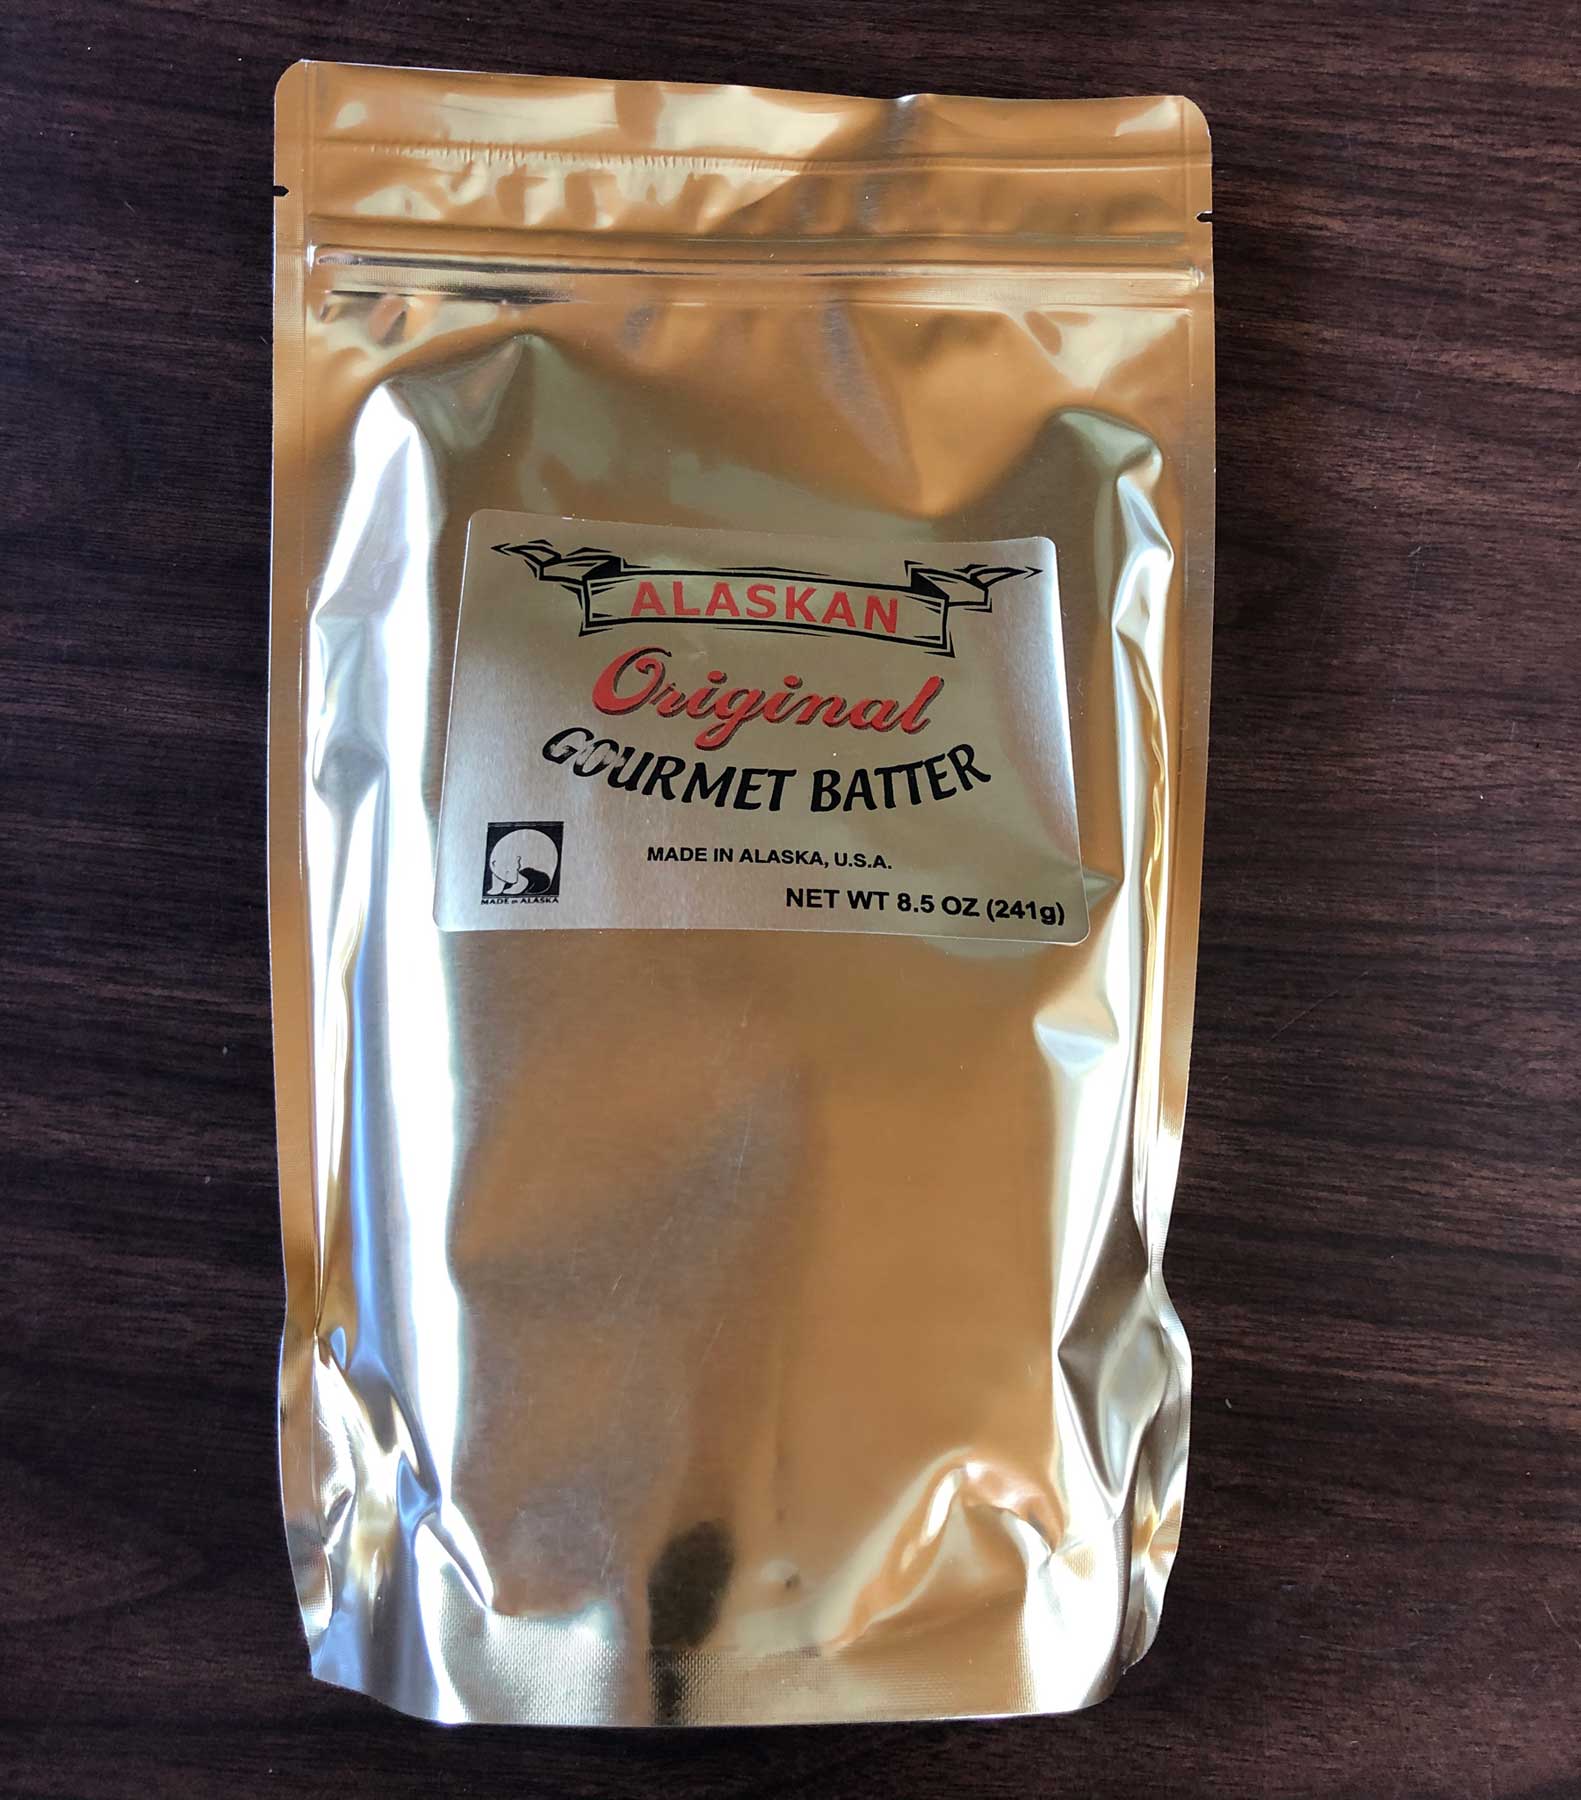 Package of fish batter